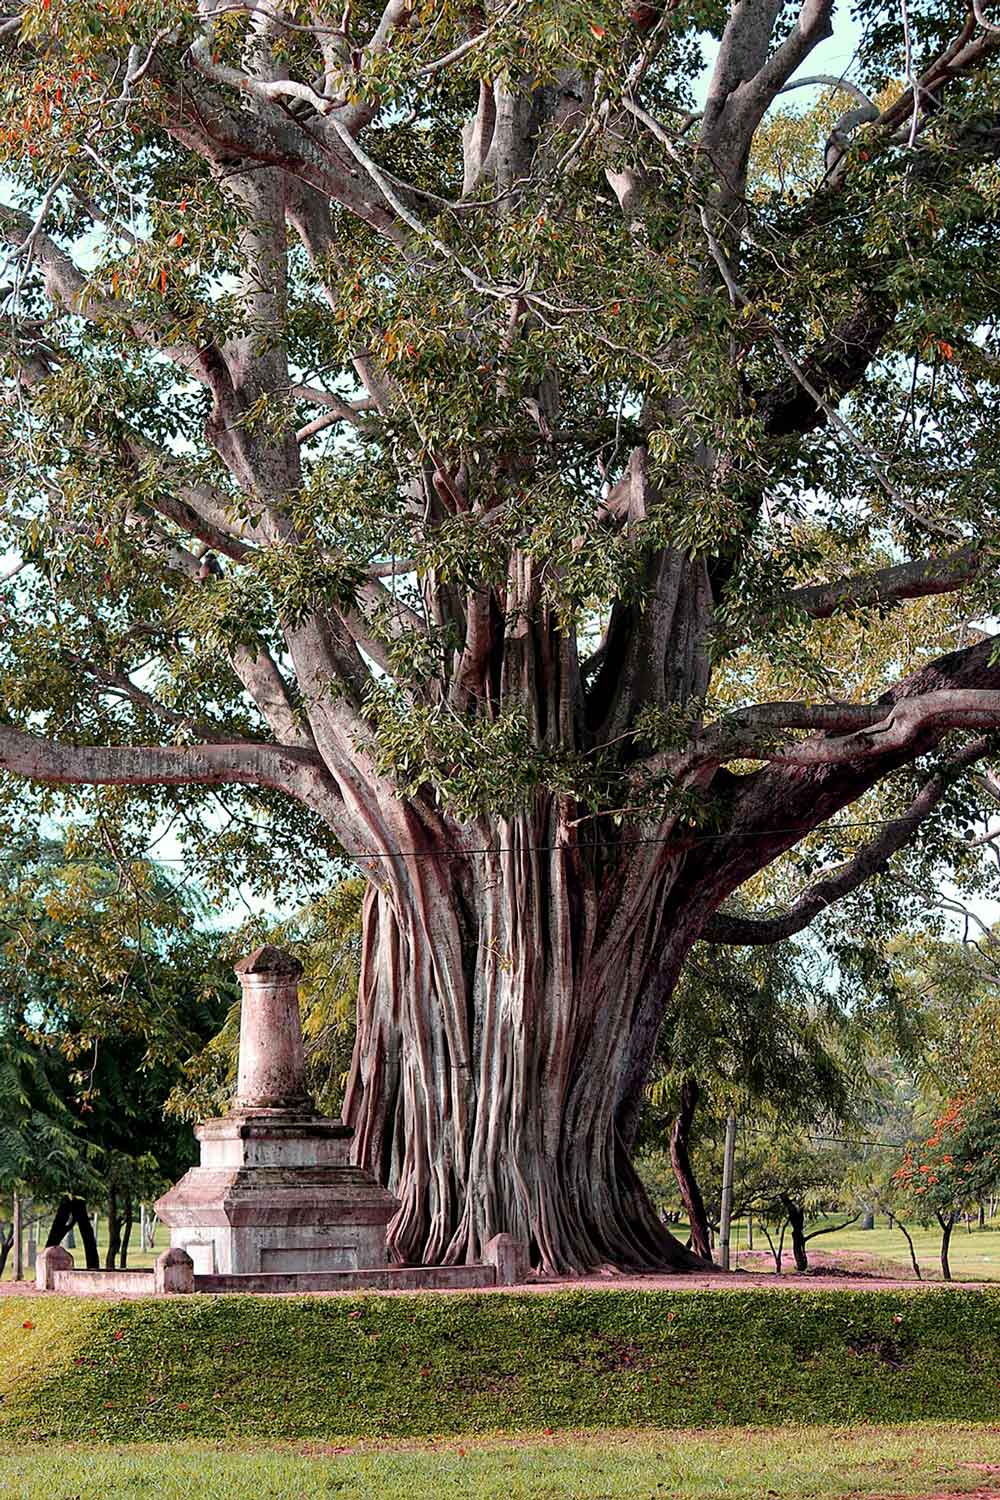 Bodhi tree, as featured in the Somā Sutta and other Buddhist teachings.